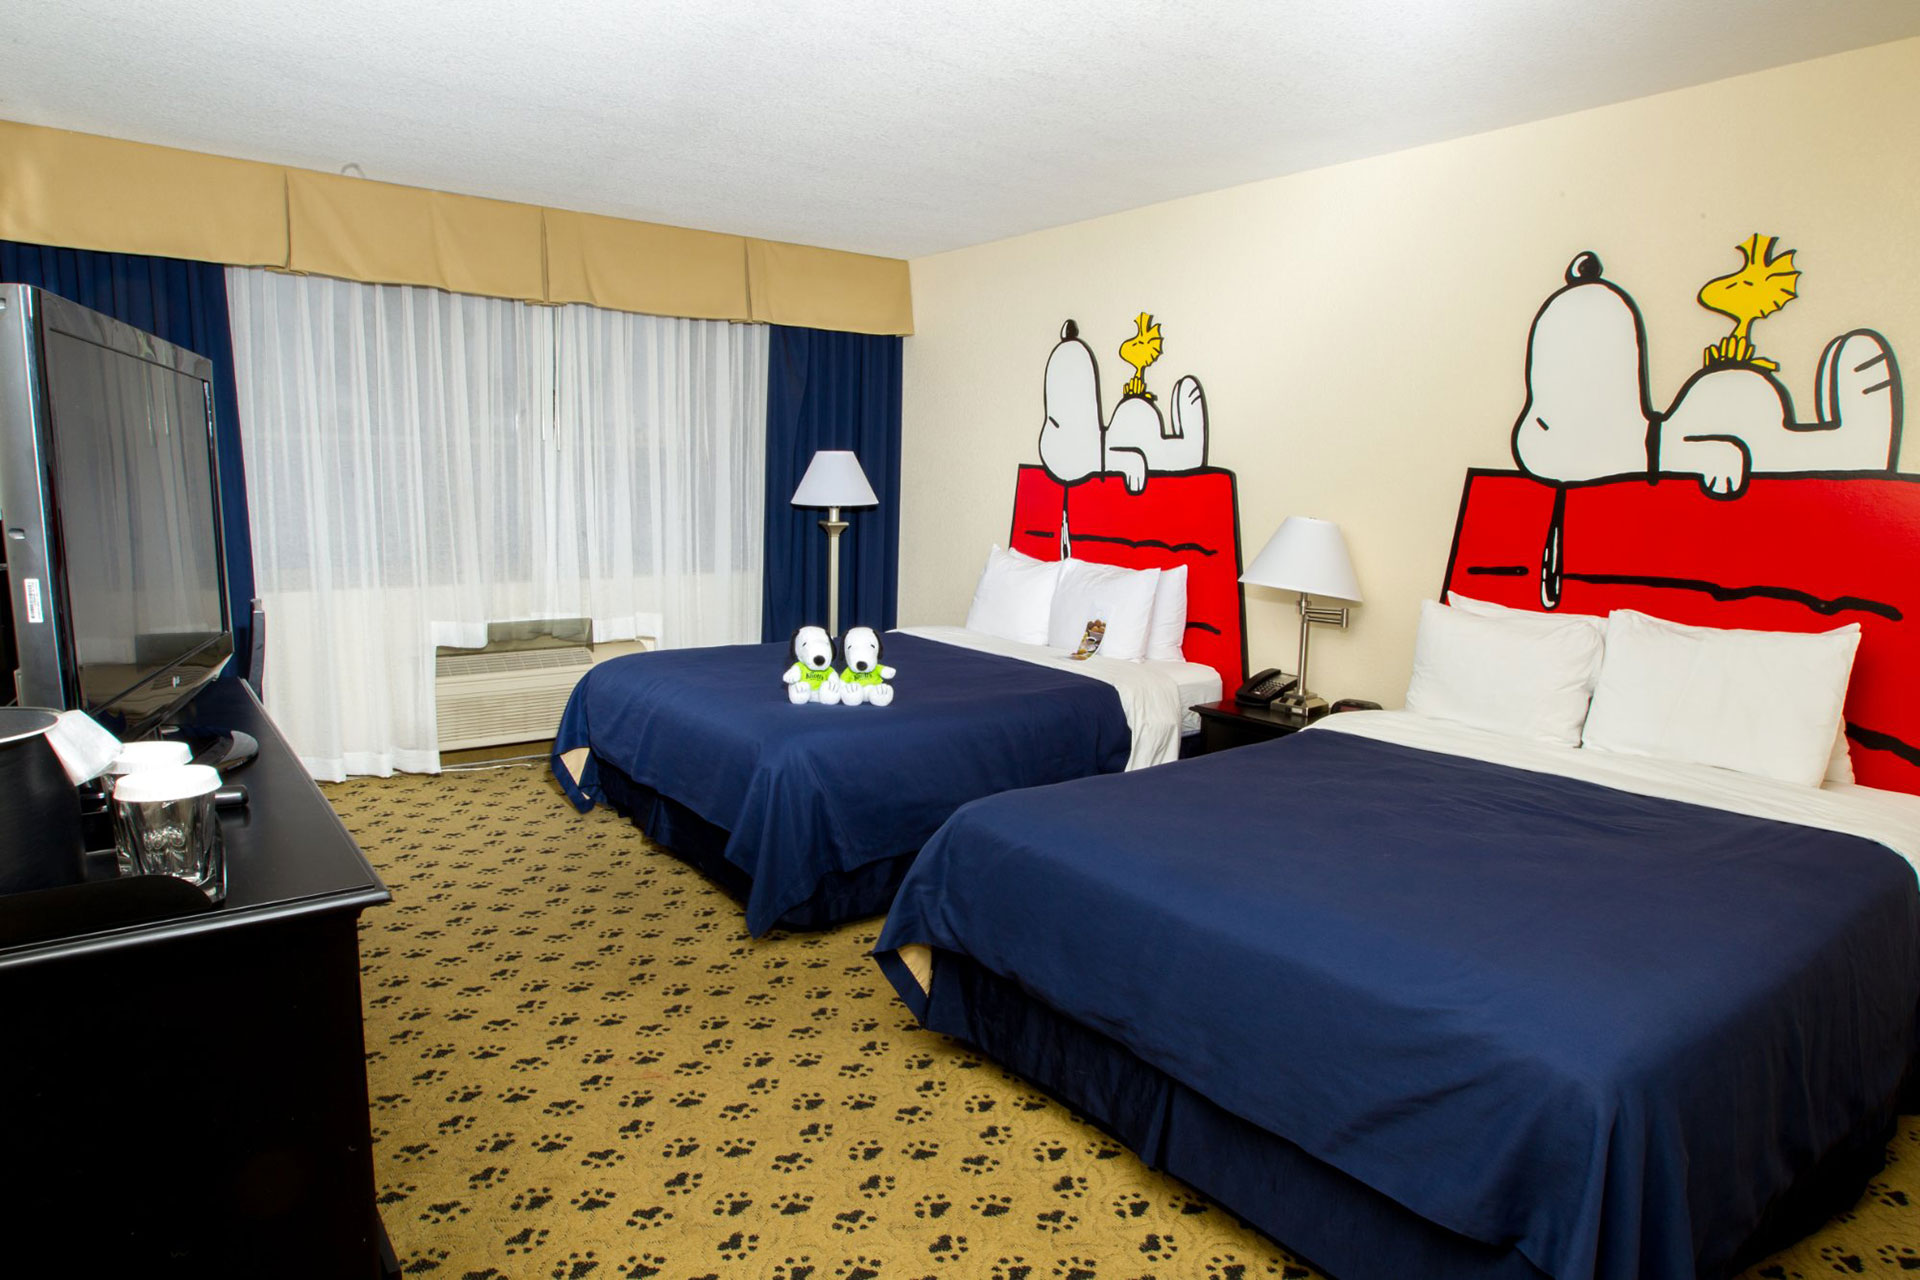 Camp Snoopy Rooms at Knott's Berry Farm Hotel; Courtesy of Knott's Berry Farm Hotel